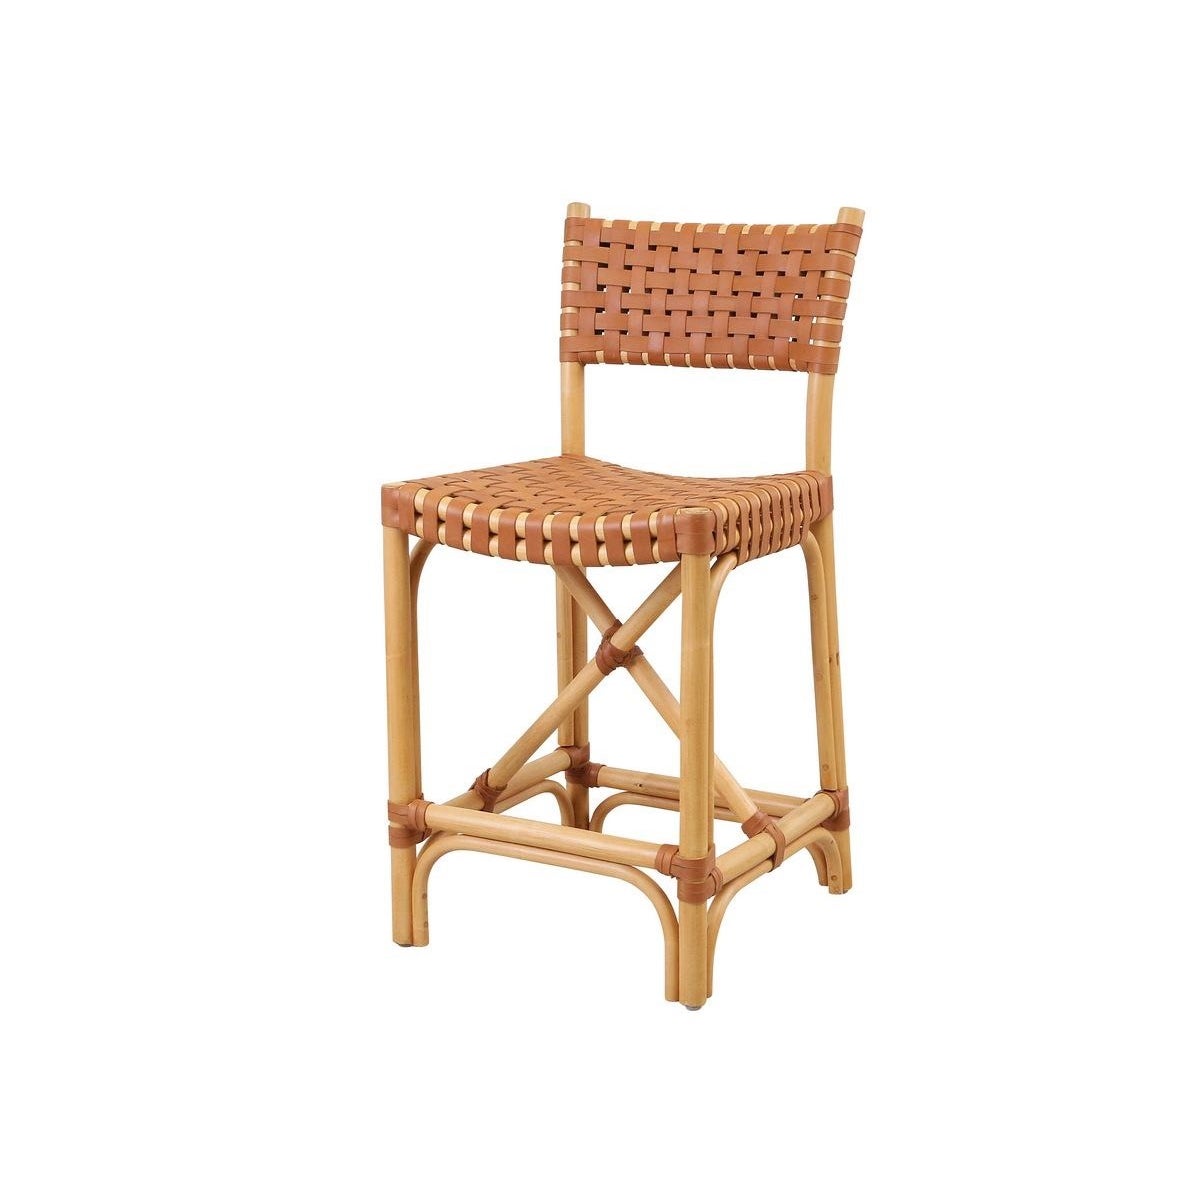 CLOSE-OUT!!Malibu Counter Chair Frame Color - Natural Leather Color - Brown 50% OFF!This Item